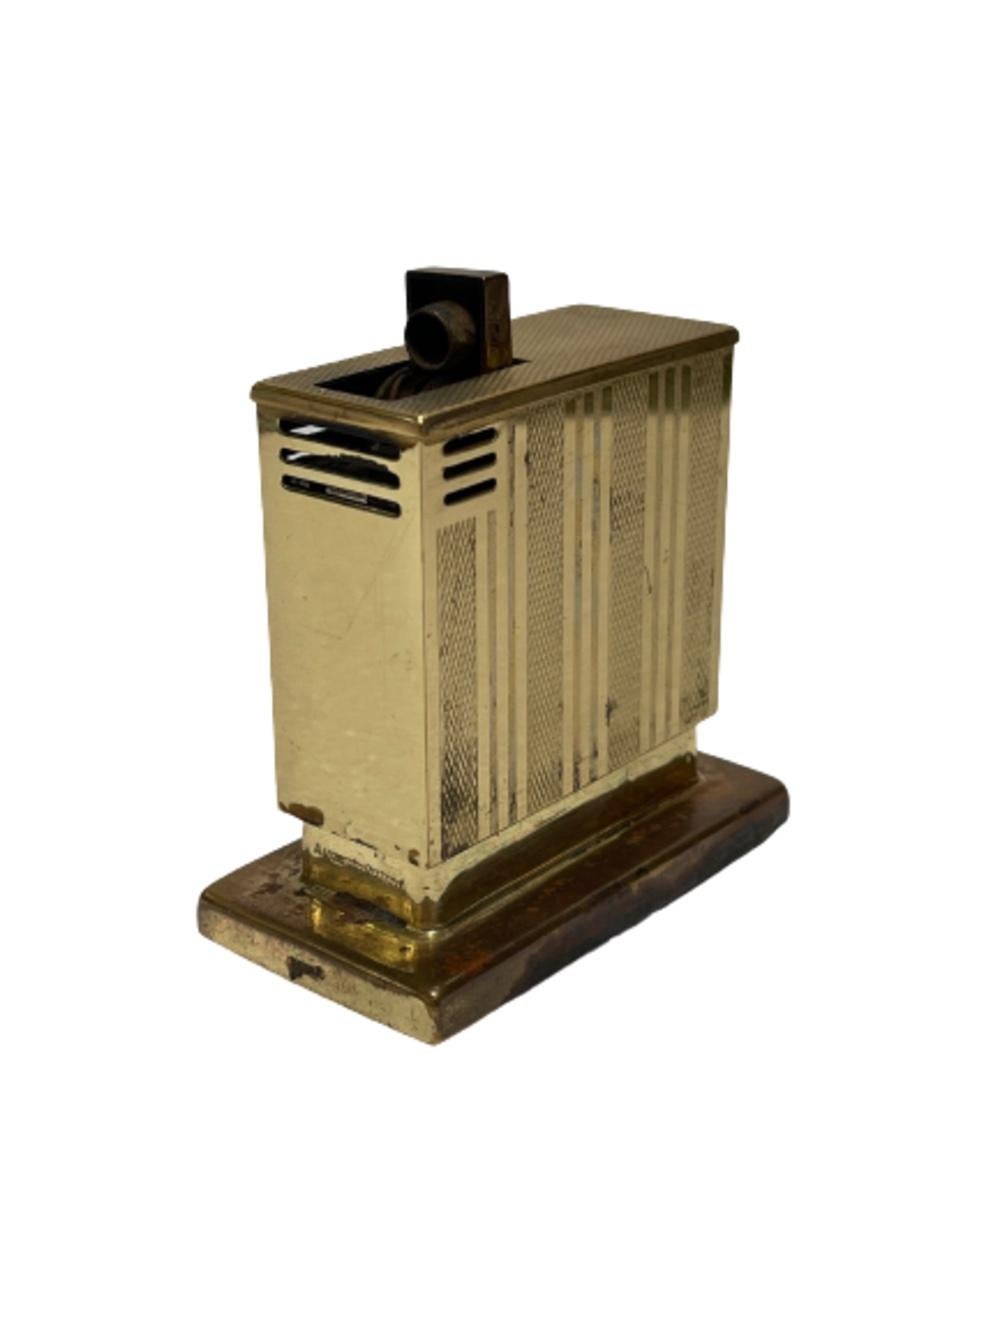 Original 1950 West German polished brass semi-auto table lighter by Augusta Lift Table Lighter Company. Simply pull up on the lighter and push back down to igniting the flame.

The lighter comes fully functional with fresh flit and fluid ready for